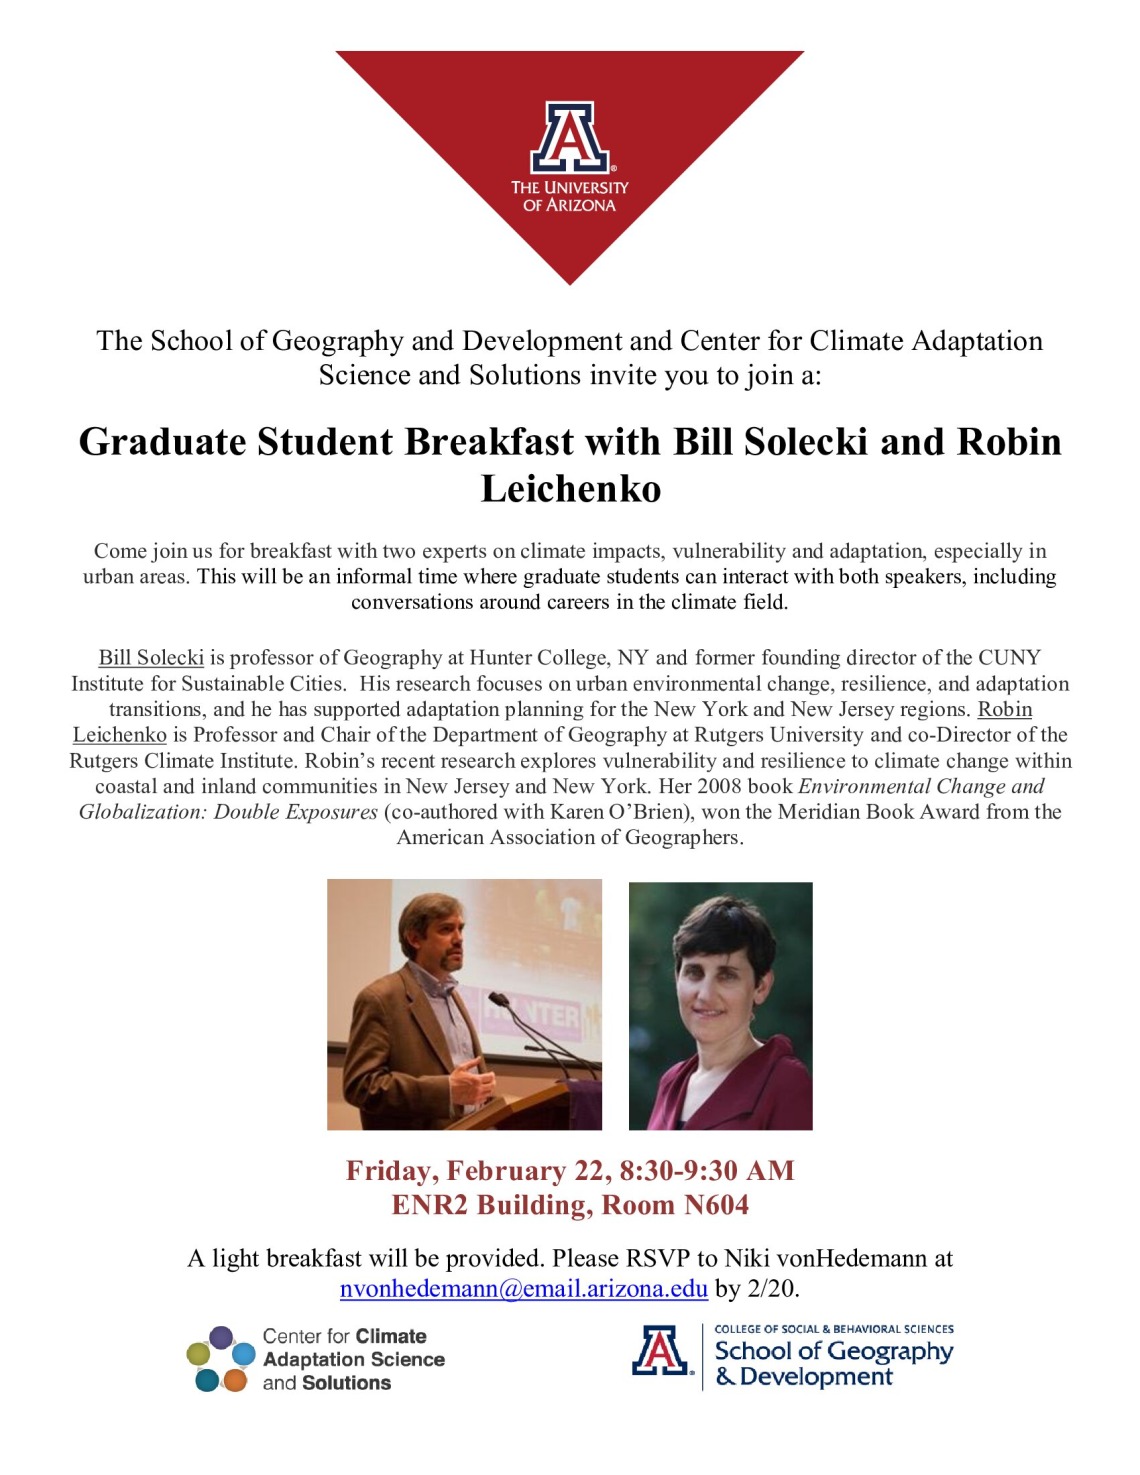 Flyer for the grad student breakfast event.